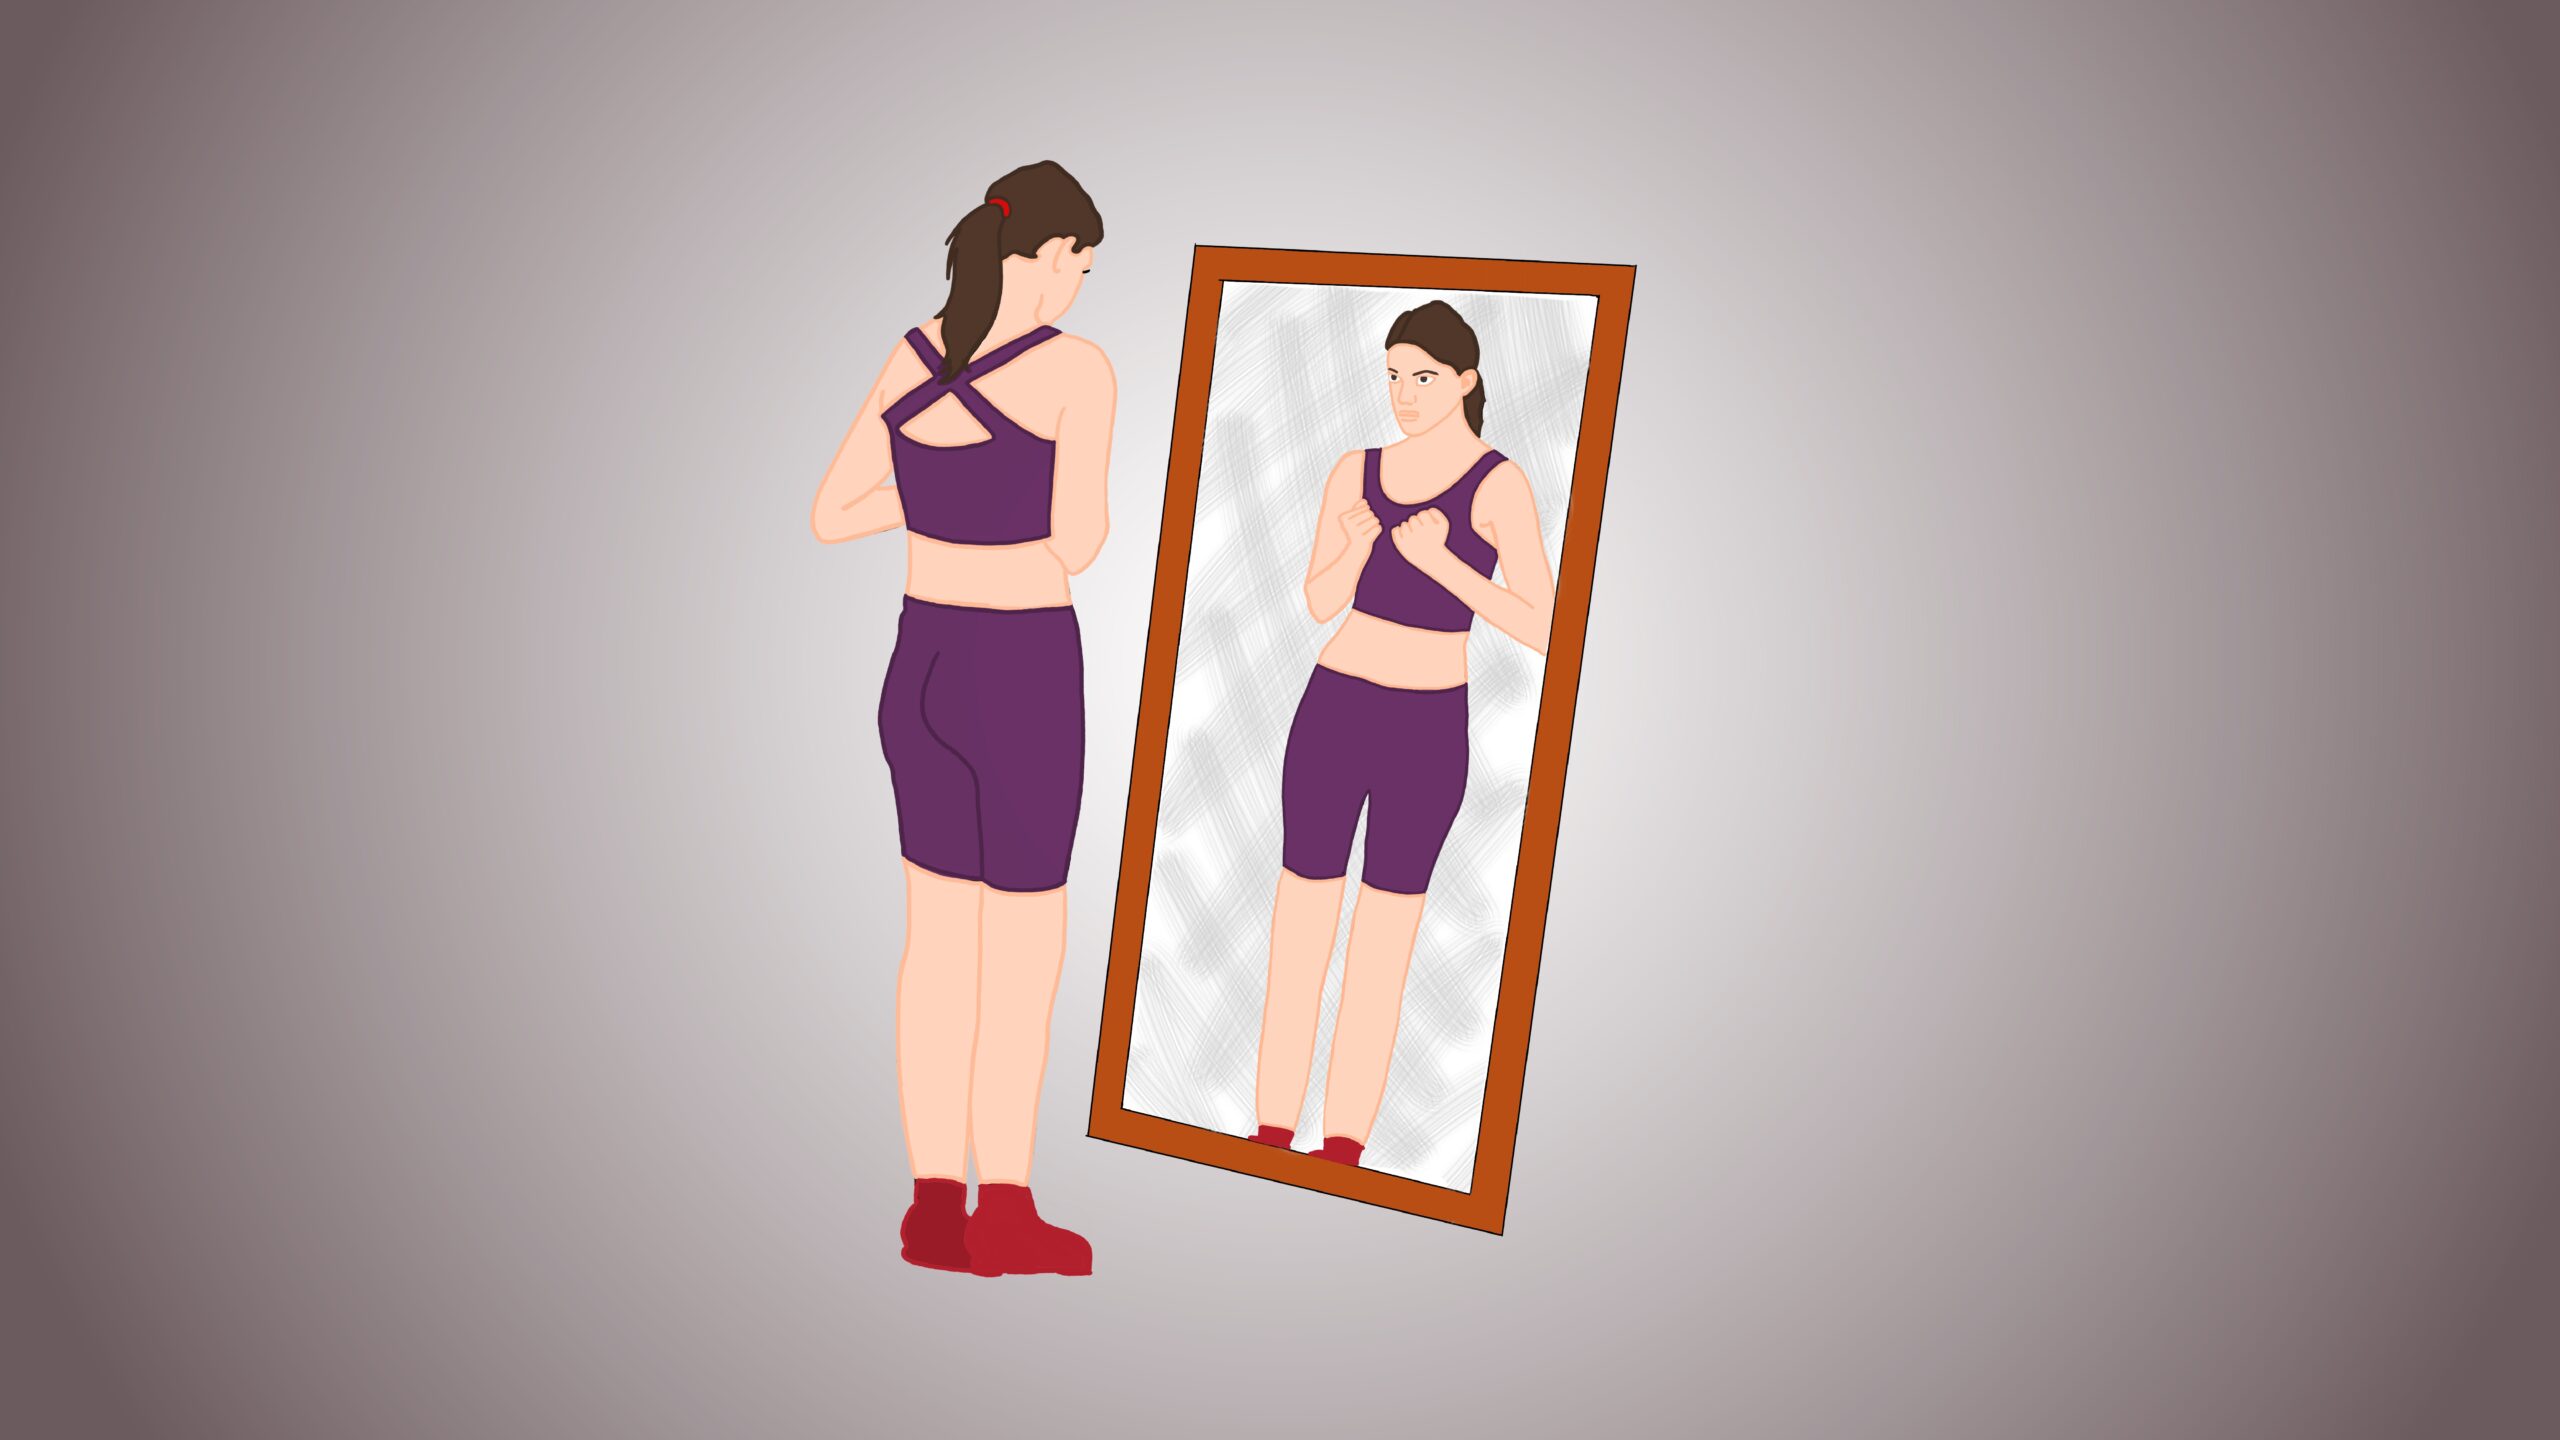 illustration of a runner looking at themselves unhappily in the mirror.